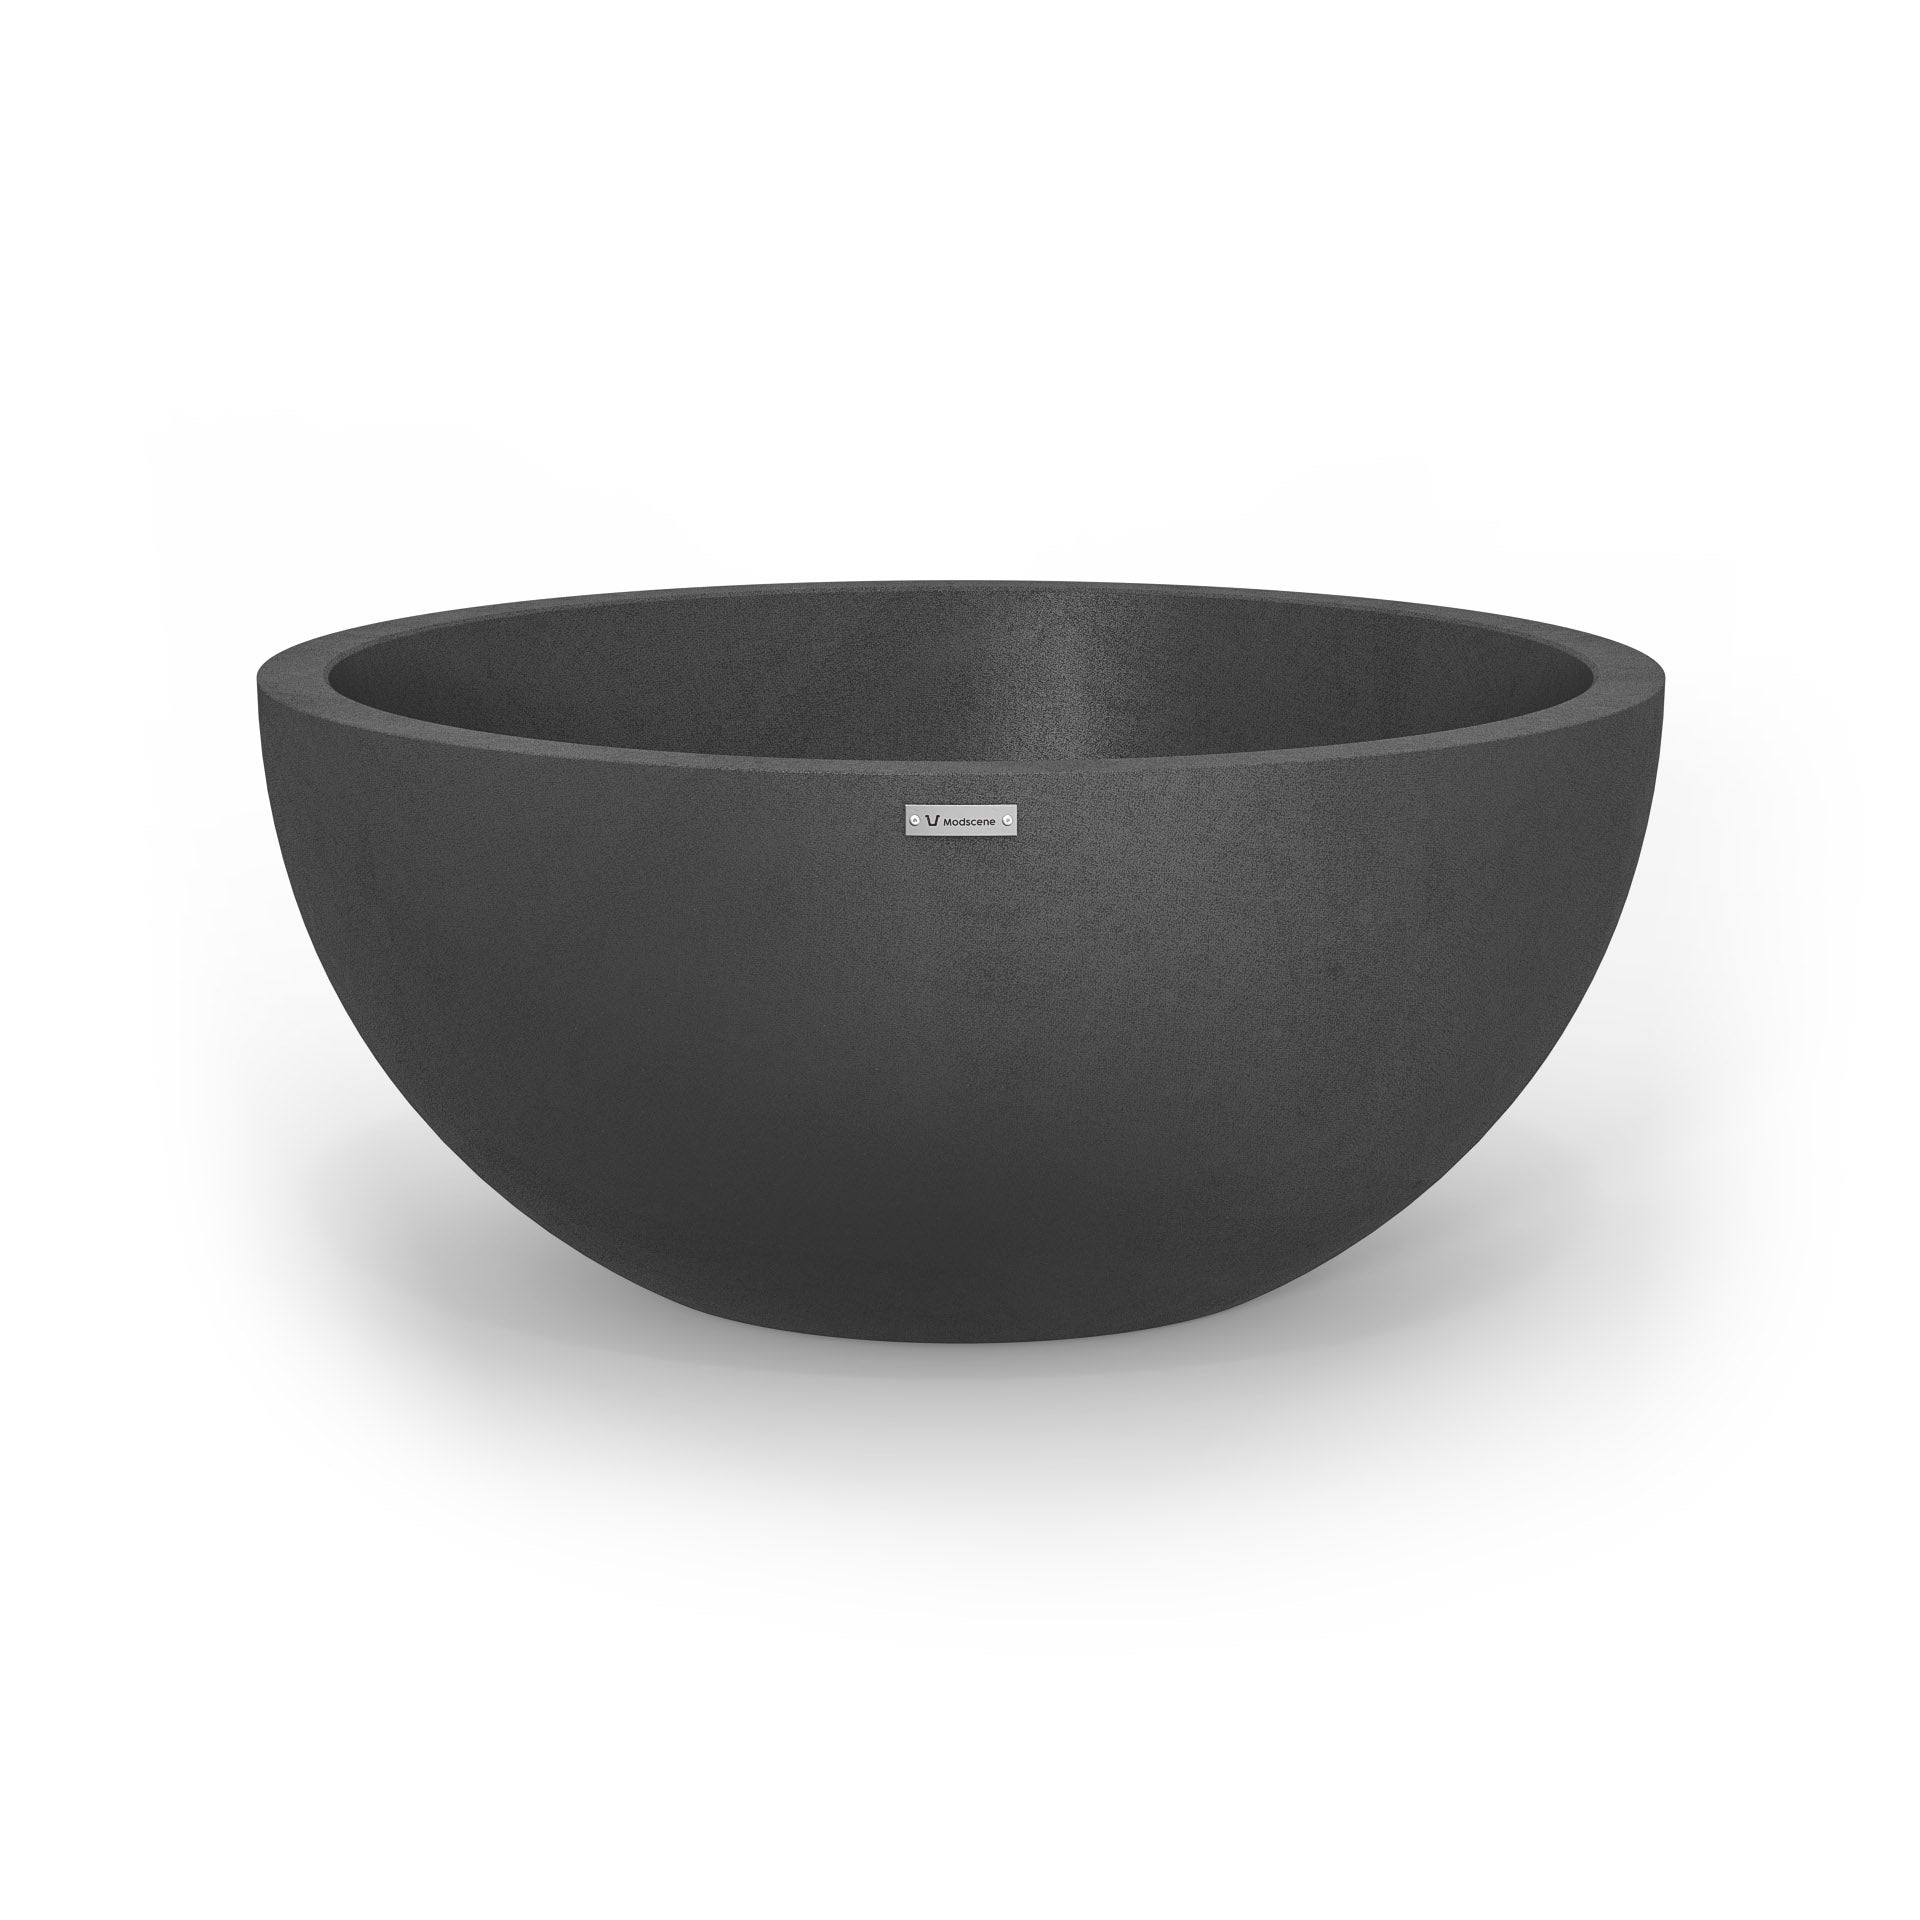 A large Modscene planter bowl in dark grey with a concrete look finish.